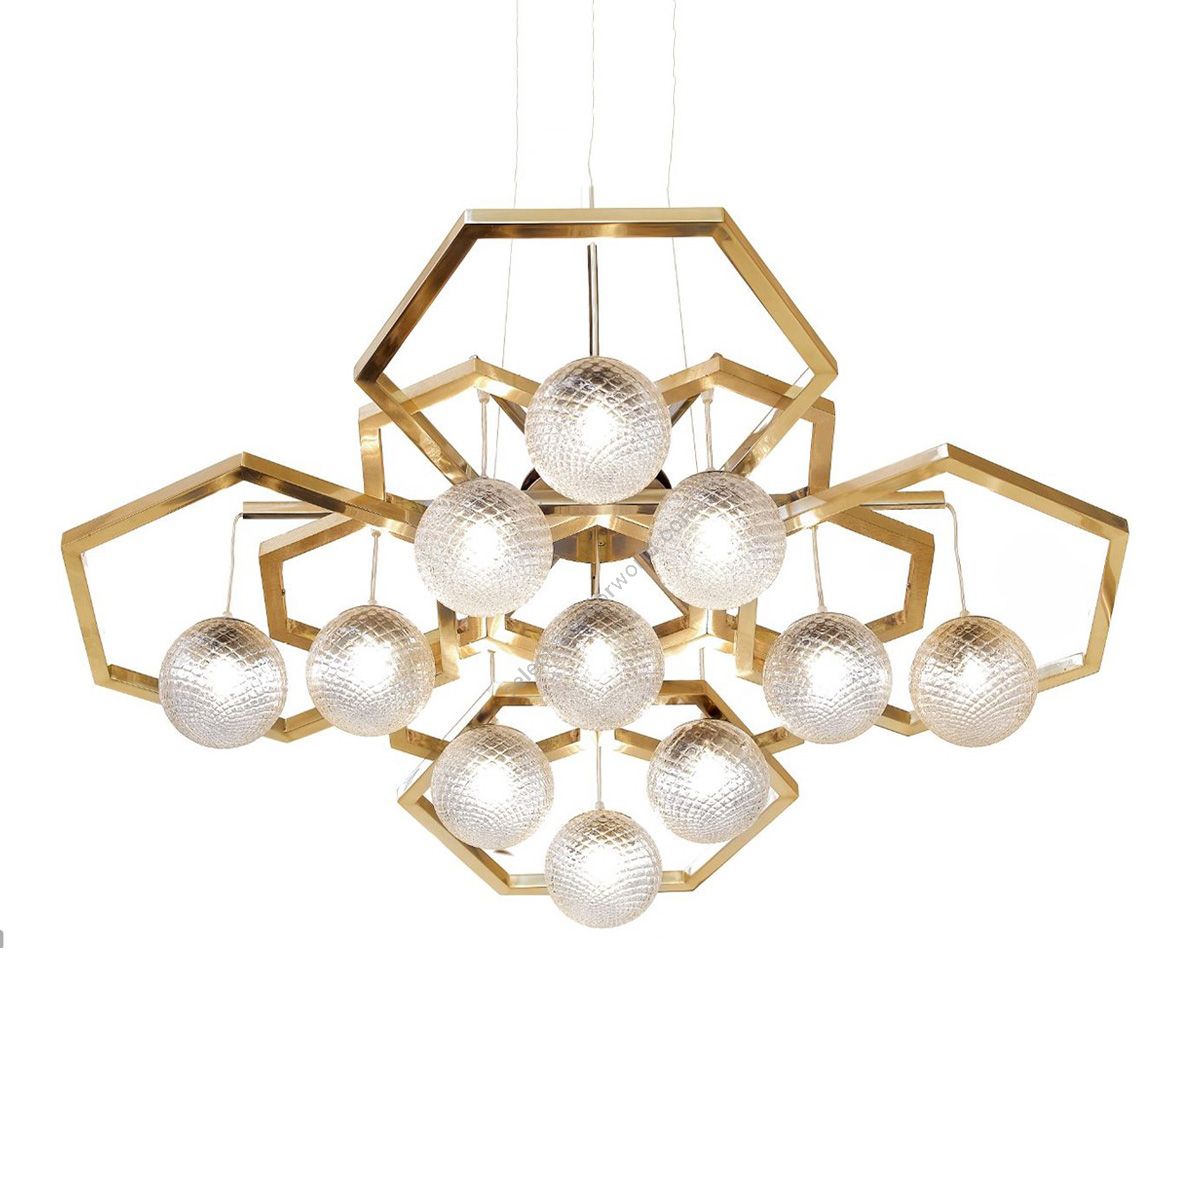 Hexagon Chandelier with Ballotton Spheres Murano glass by Il Paralume Marina